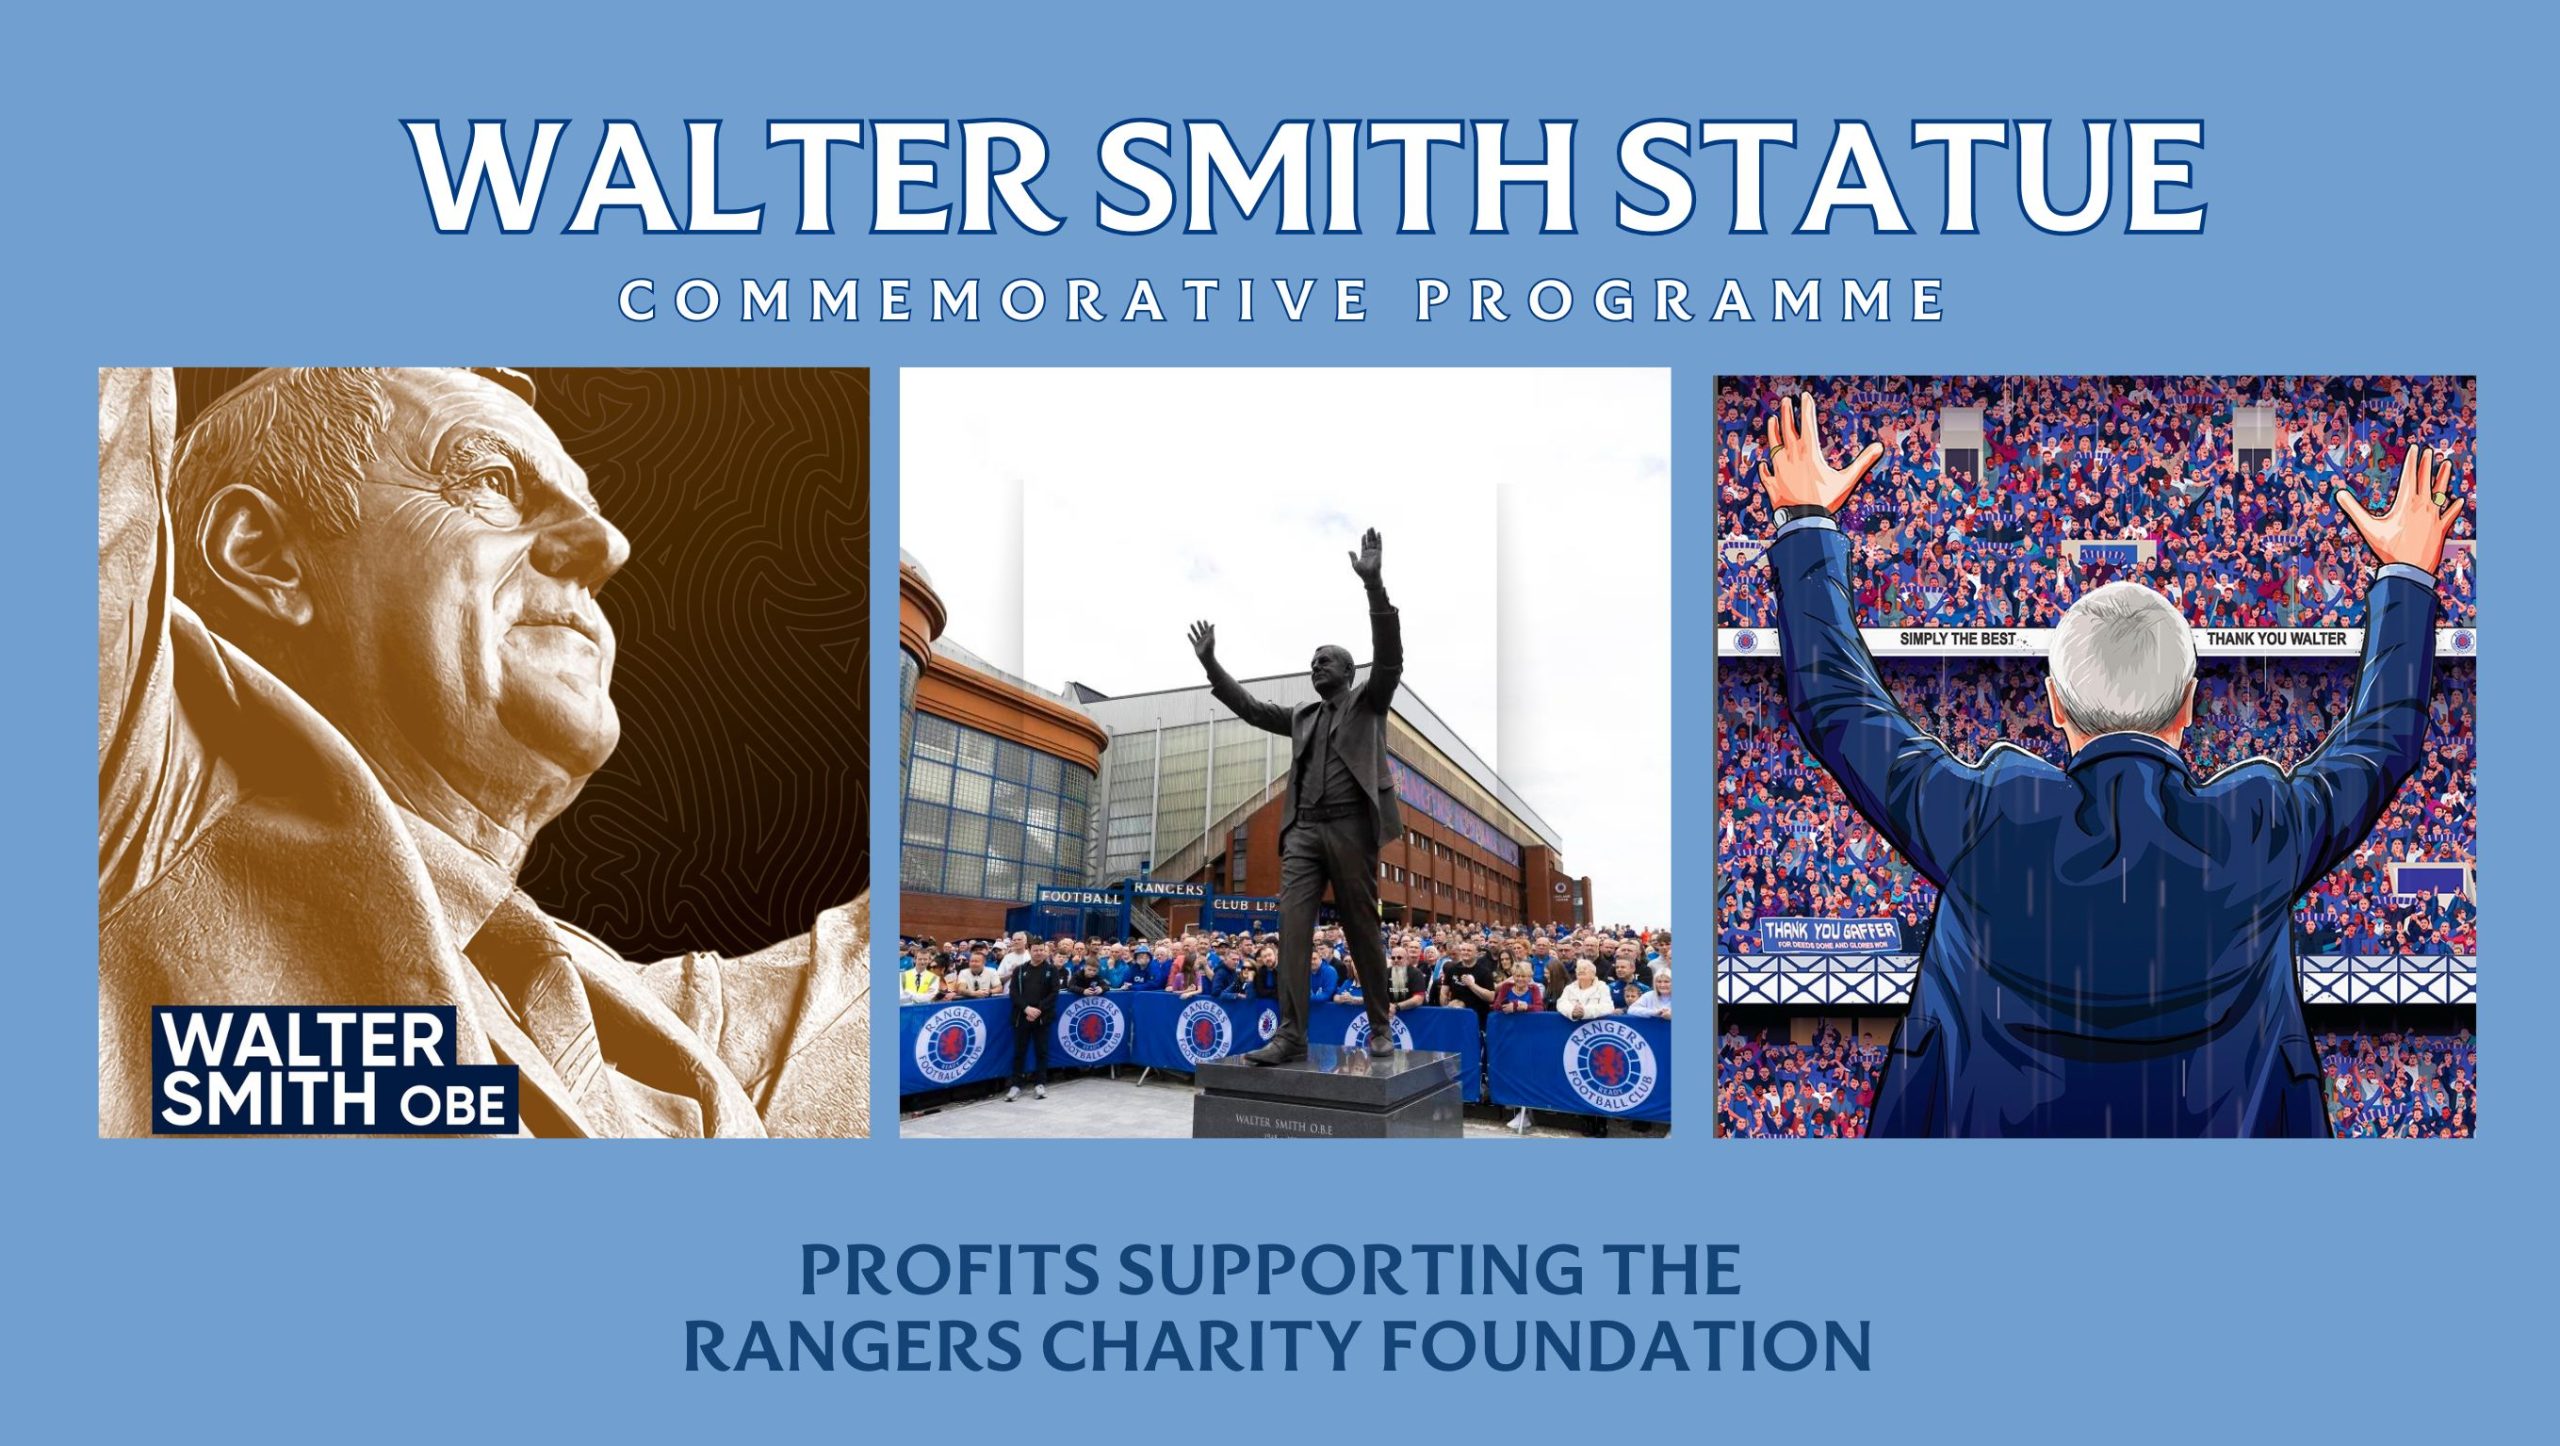 Limited Edition Walter Smith Commemorative Programme On Sale Now